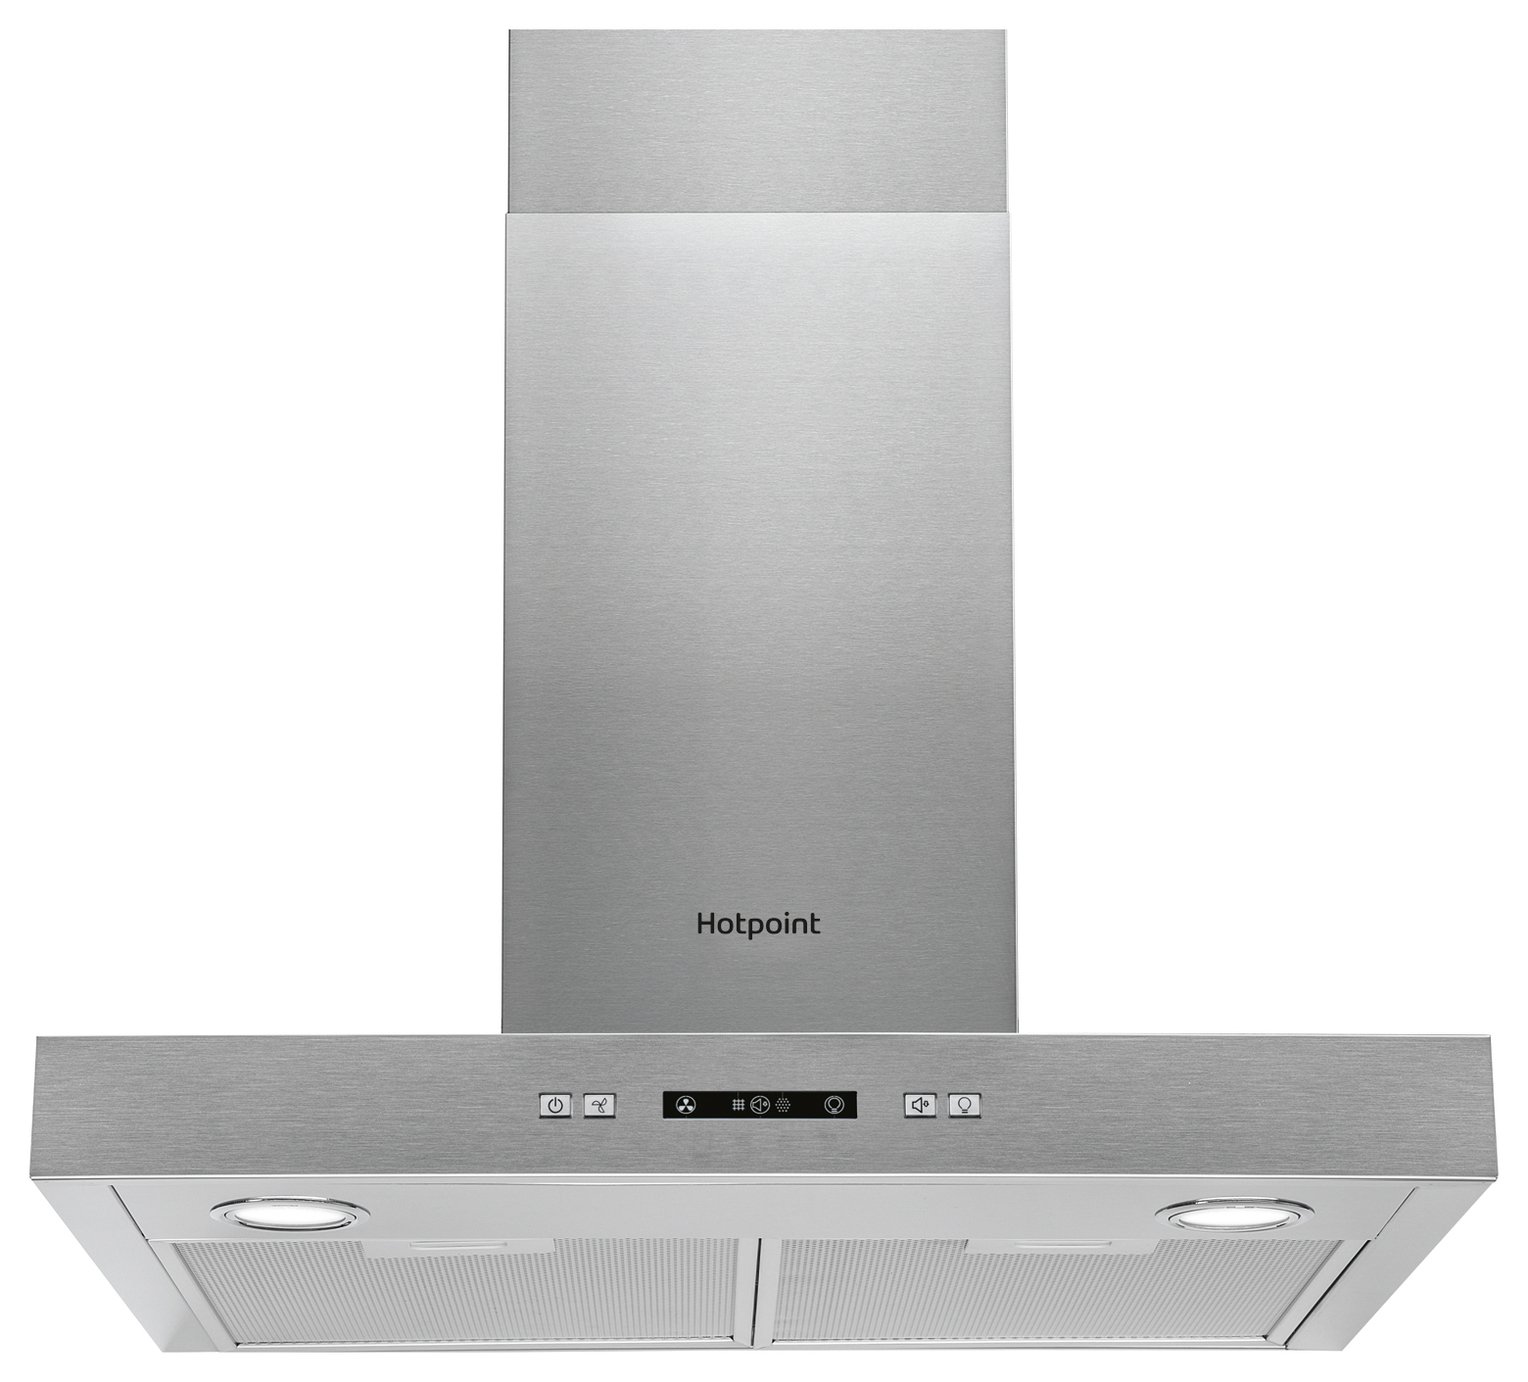 Hotpoint PHBS67FLLIX 60cm Cooker Hood - Stainless Steel